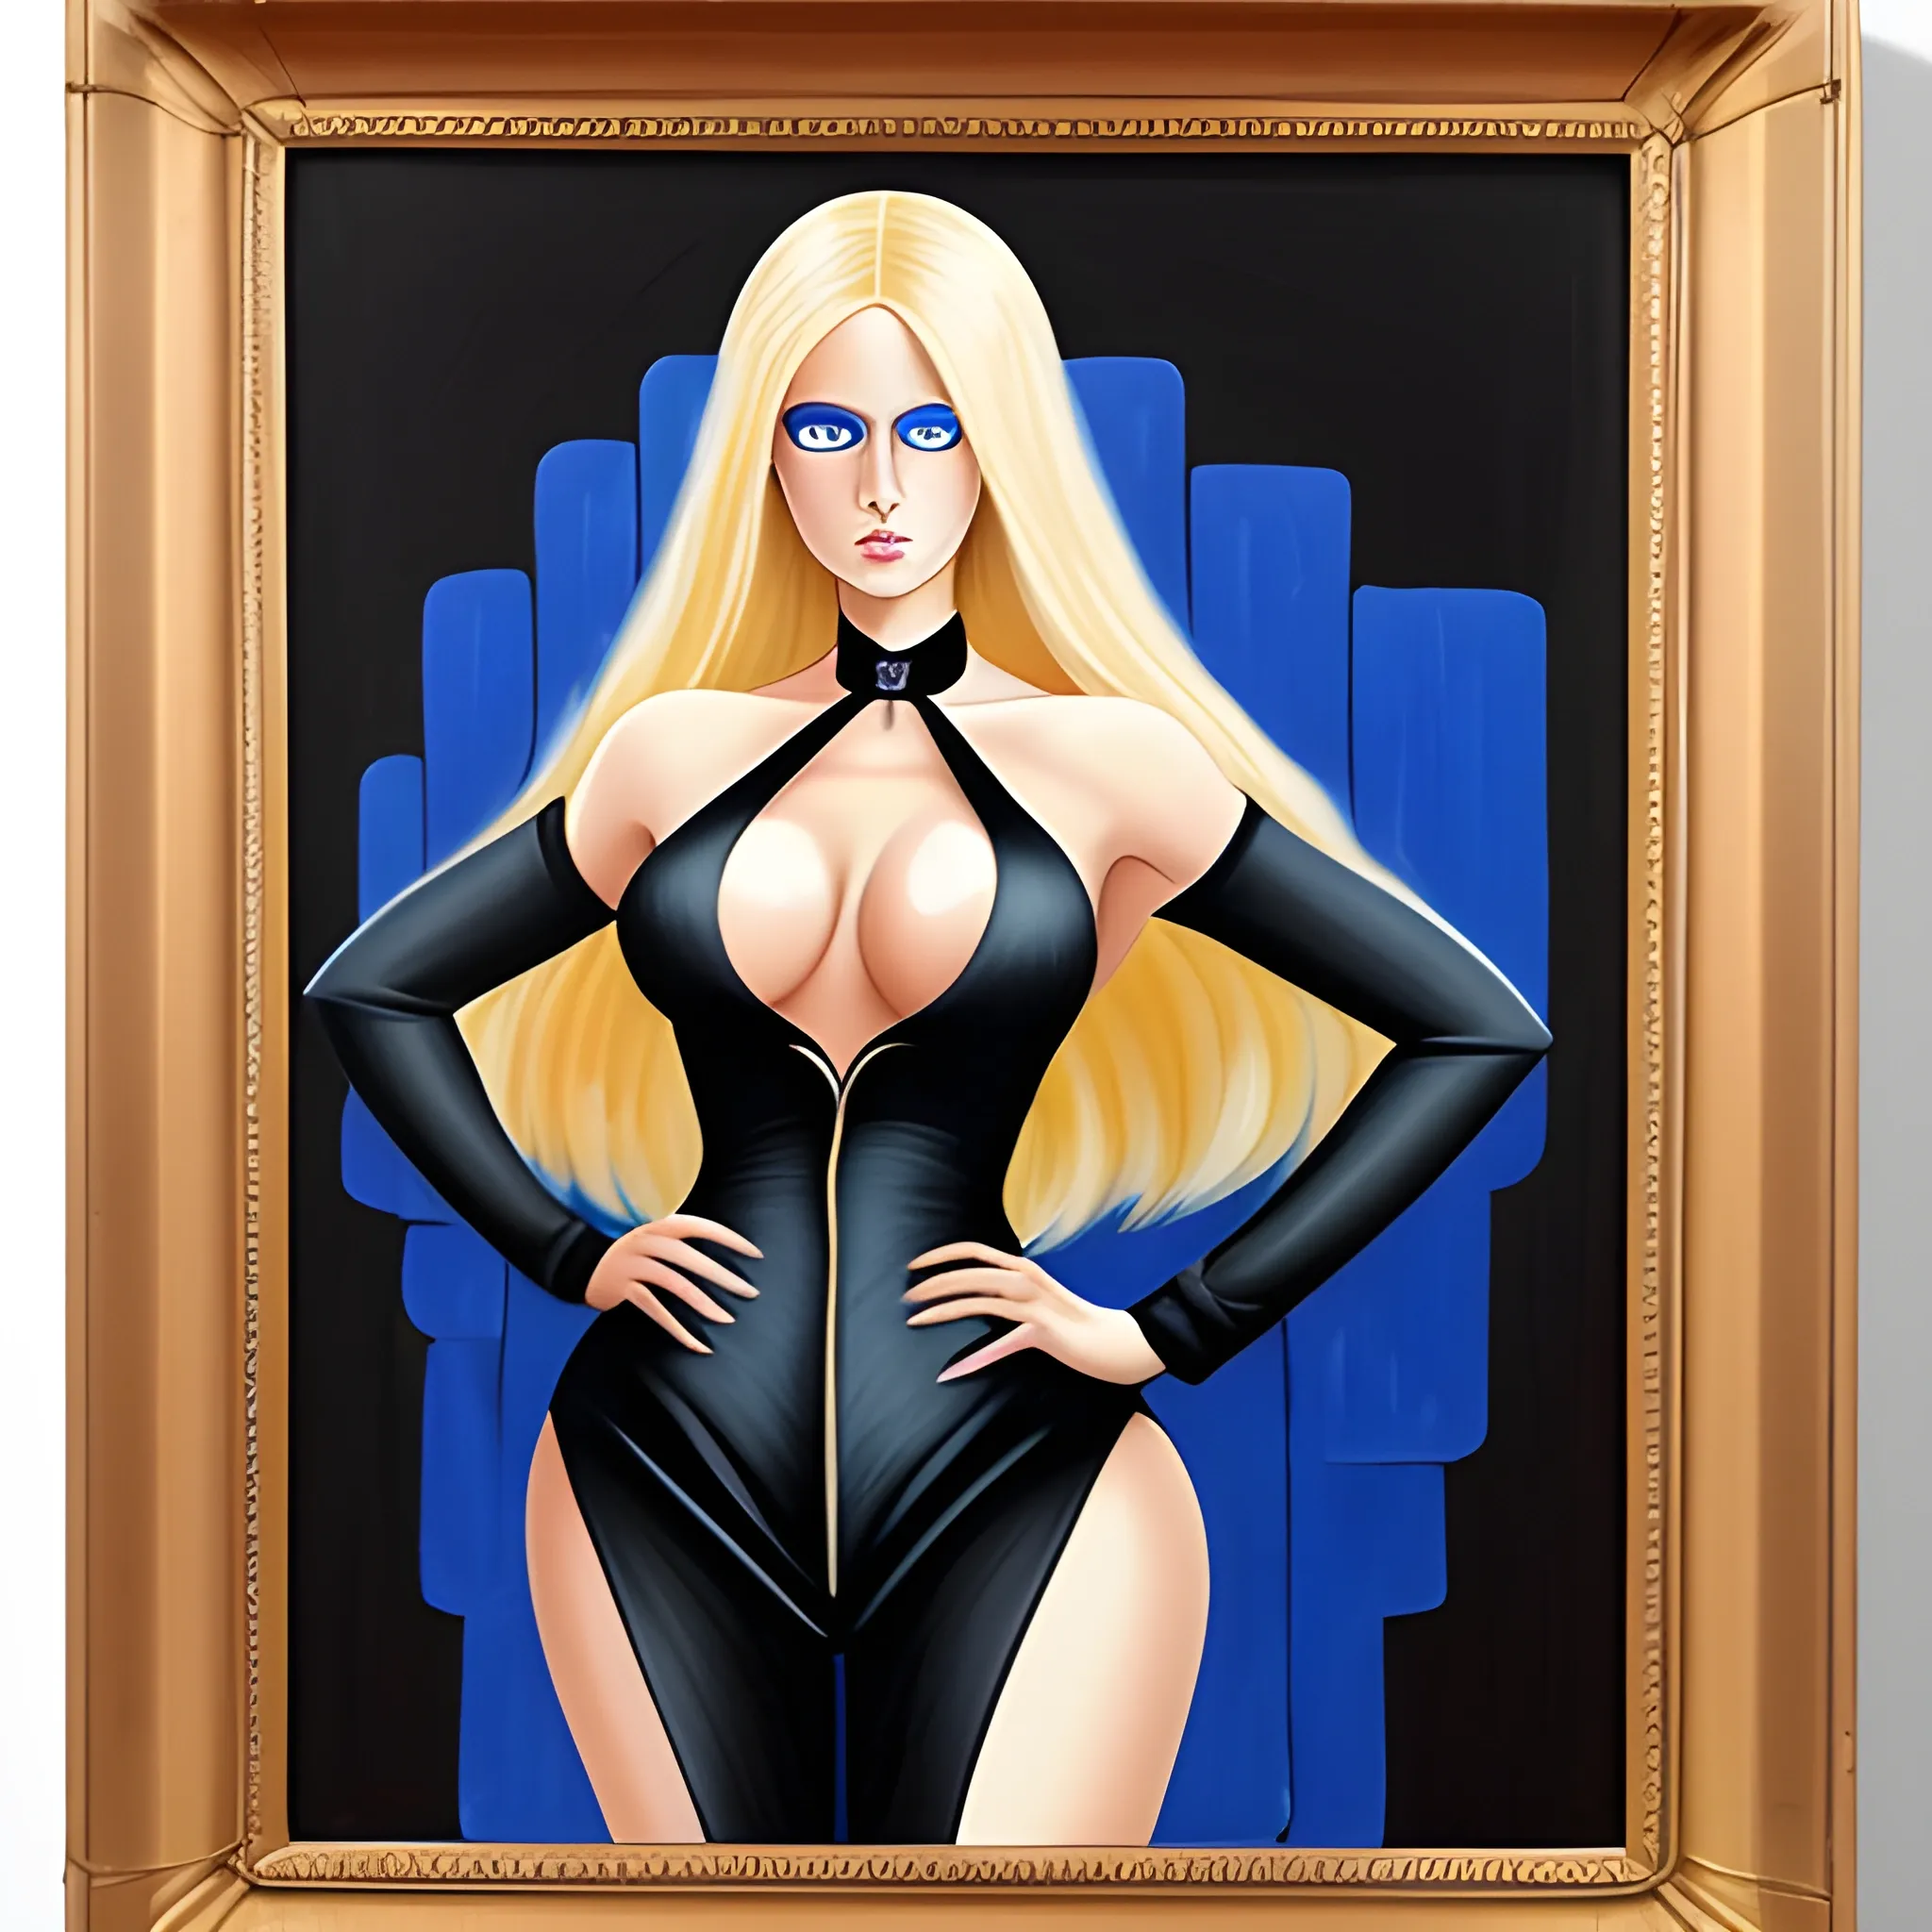 Blue eyes, very long and thick blonde hair, dramatic hourglass figure, five-foot five-inches tall, wearing high-heels, business suit, Oil Painting